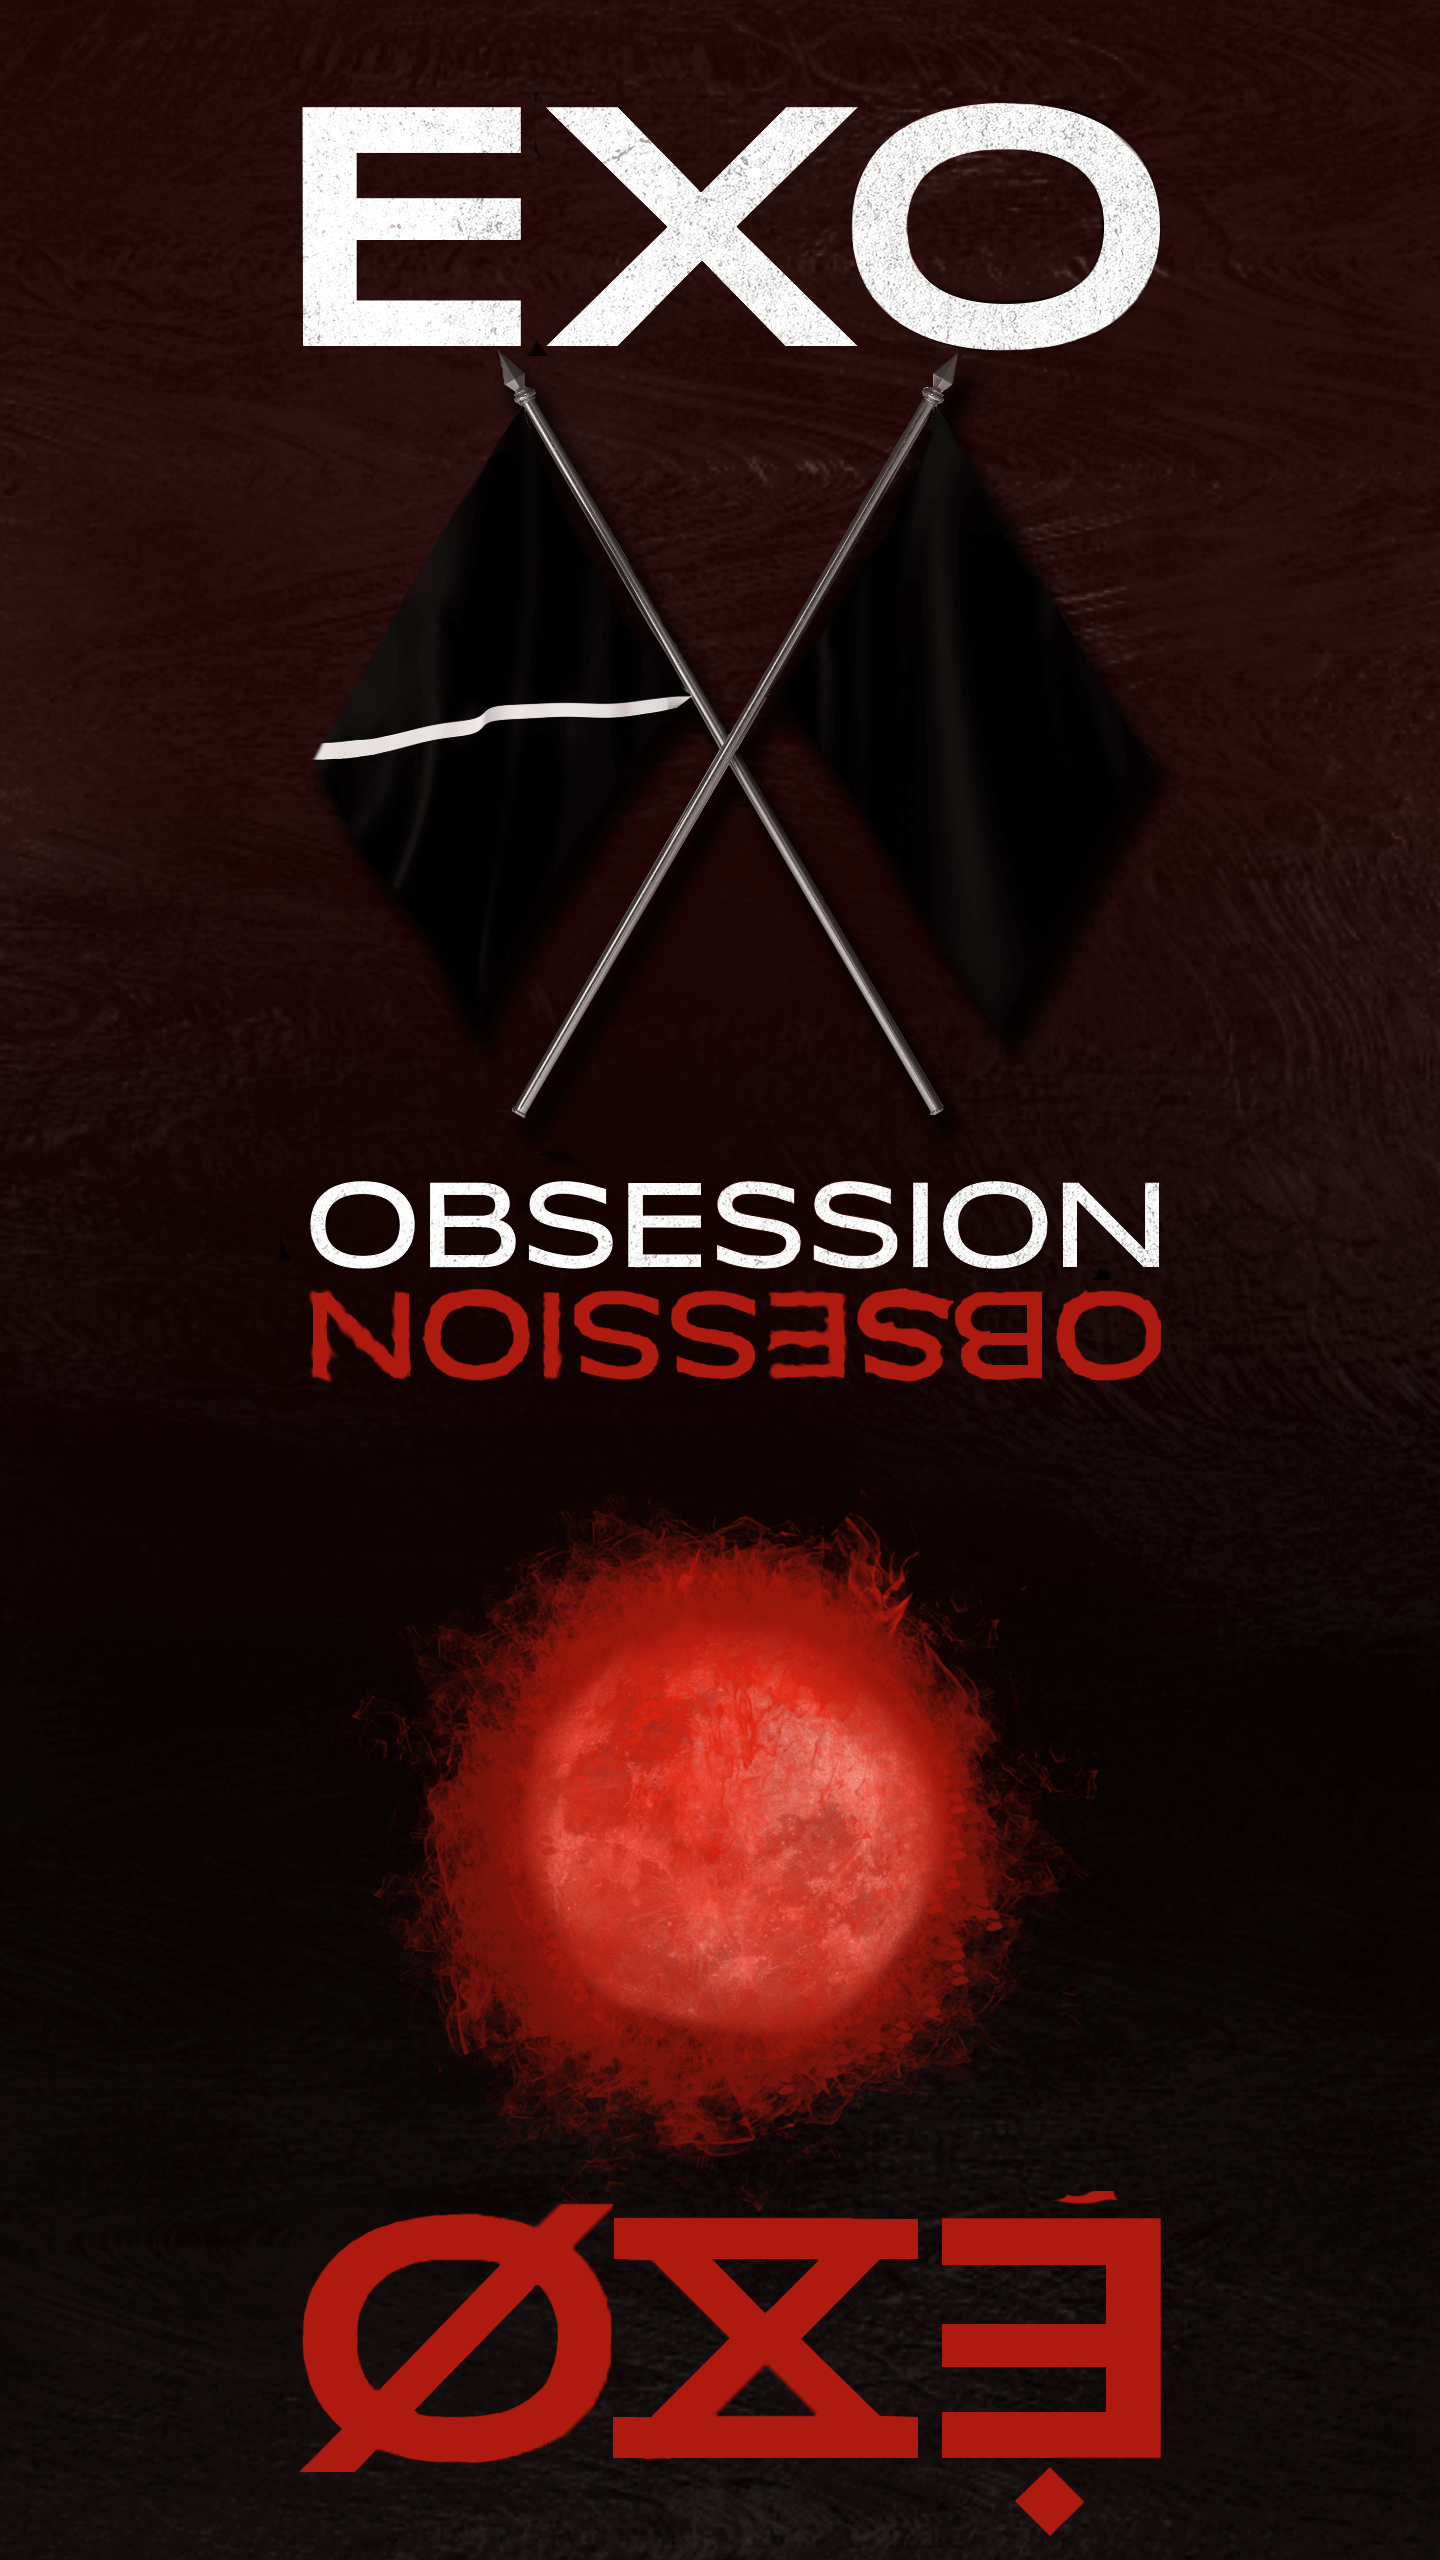 Exo Obsession Wallpapers Top Free Exo Obsession Backgrounds Wallpaperaccess